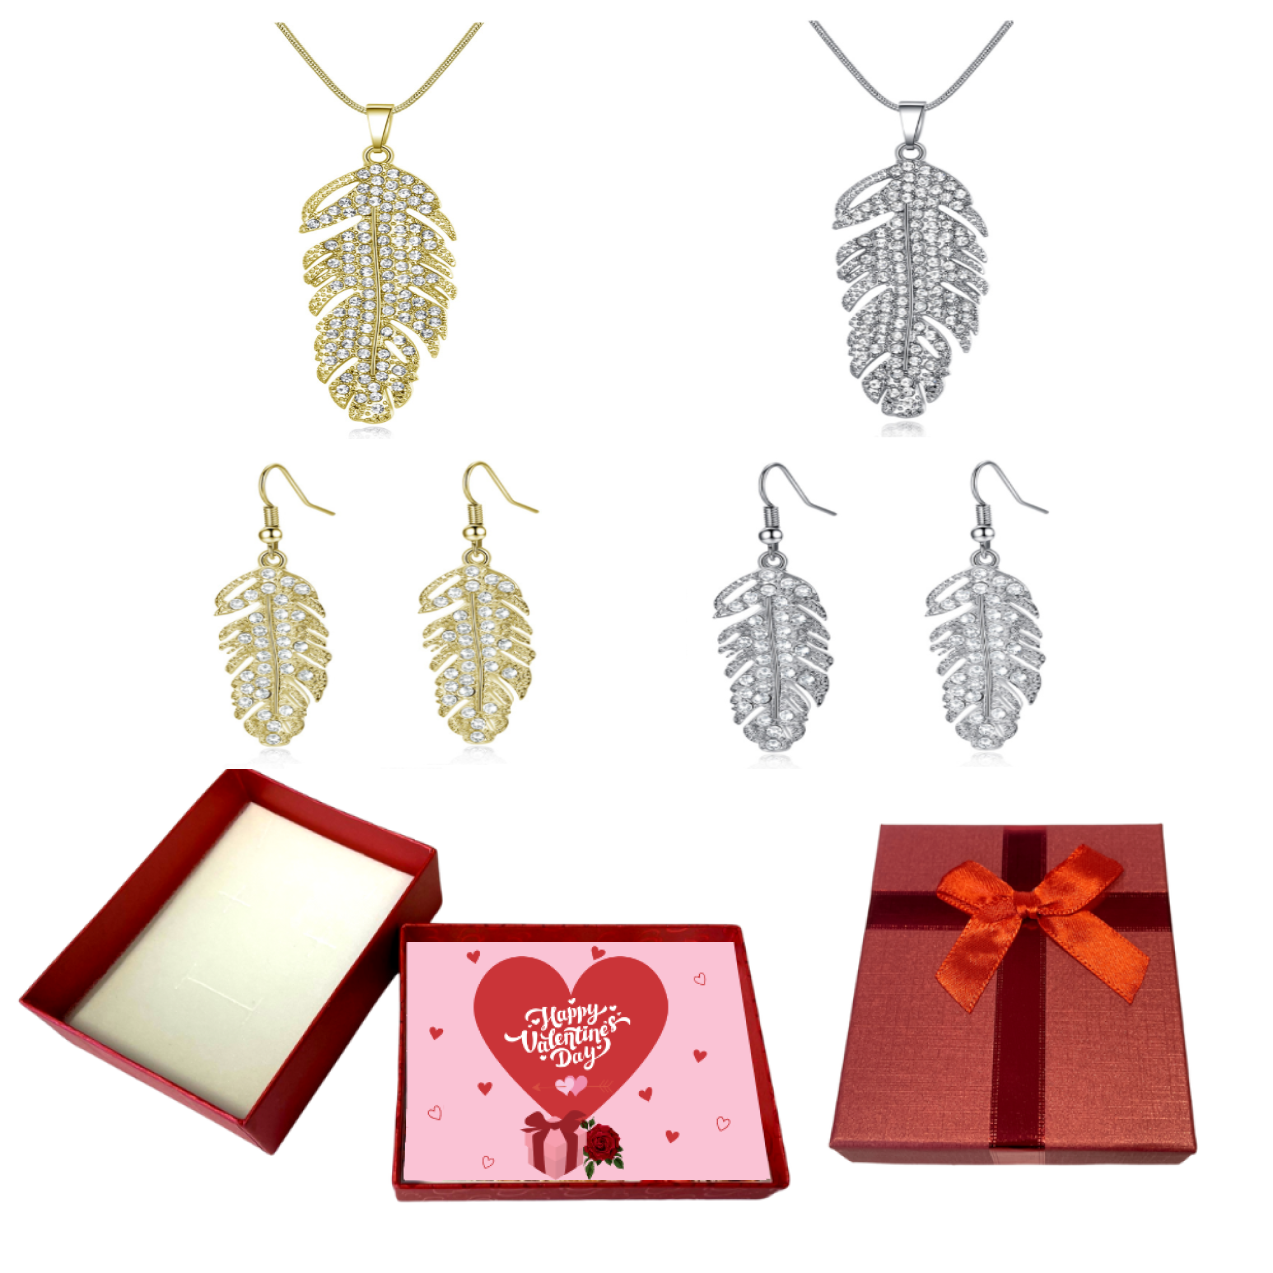 20 pcs - Gold and Silver Feathers Necklace and Earrings Set With Valentine Gift Box - 10 Sets Mixed|GCJ182-Gold/Silver-Valentine Box|UK SELLER